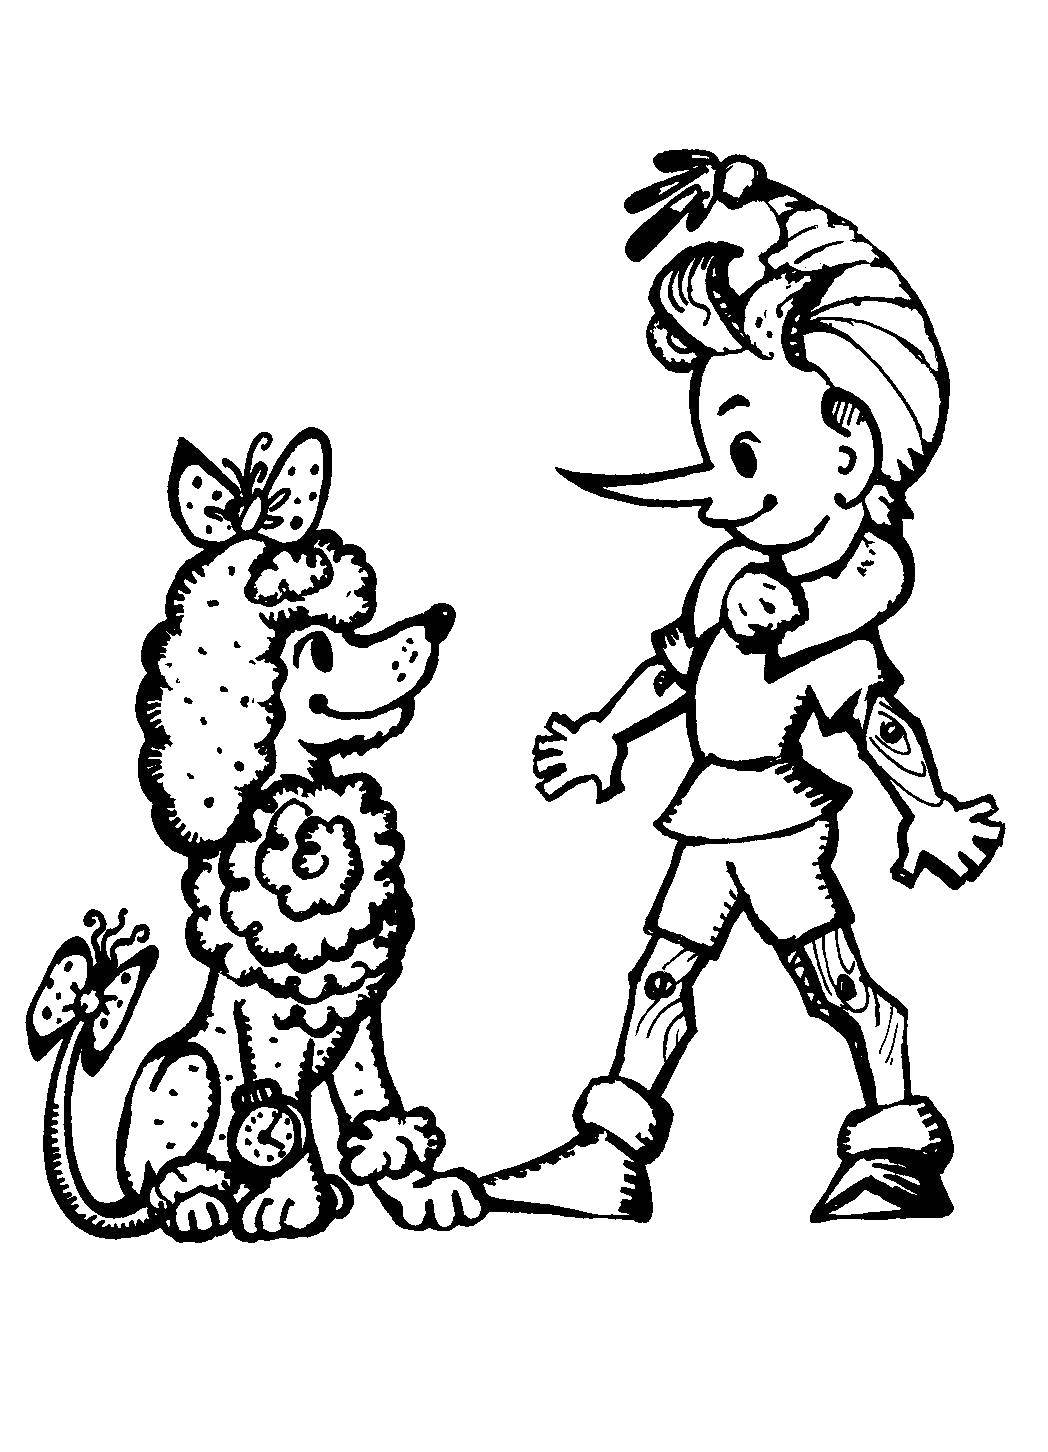 Coloring Pinocchio and the poodle. Category Golden key. Tags:  Pinocchio , Golden Key, cartoon.